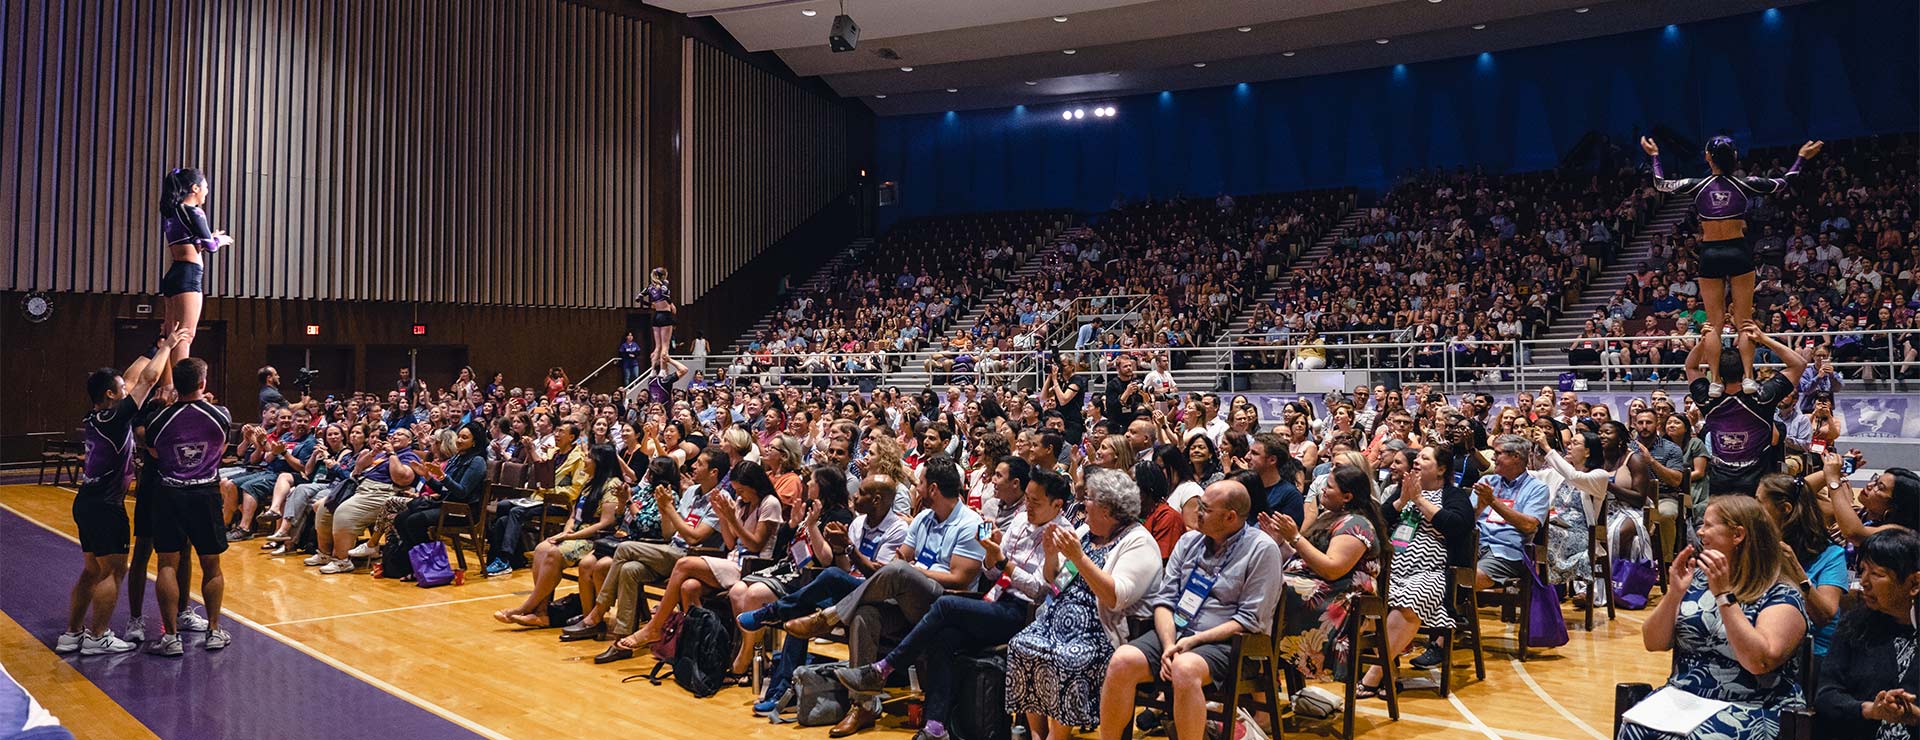 Audience in the auditorium during the International ACAC Conference in 2019